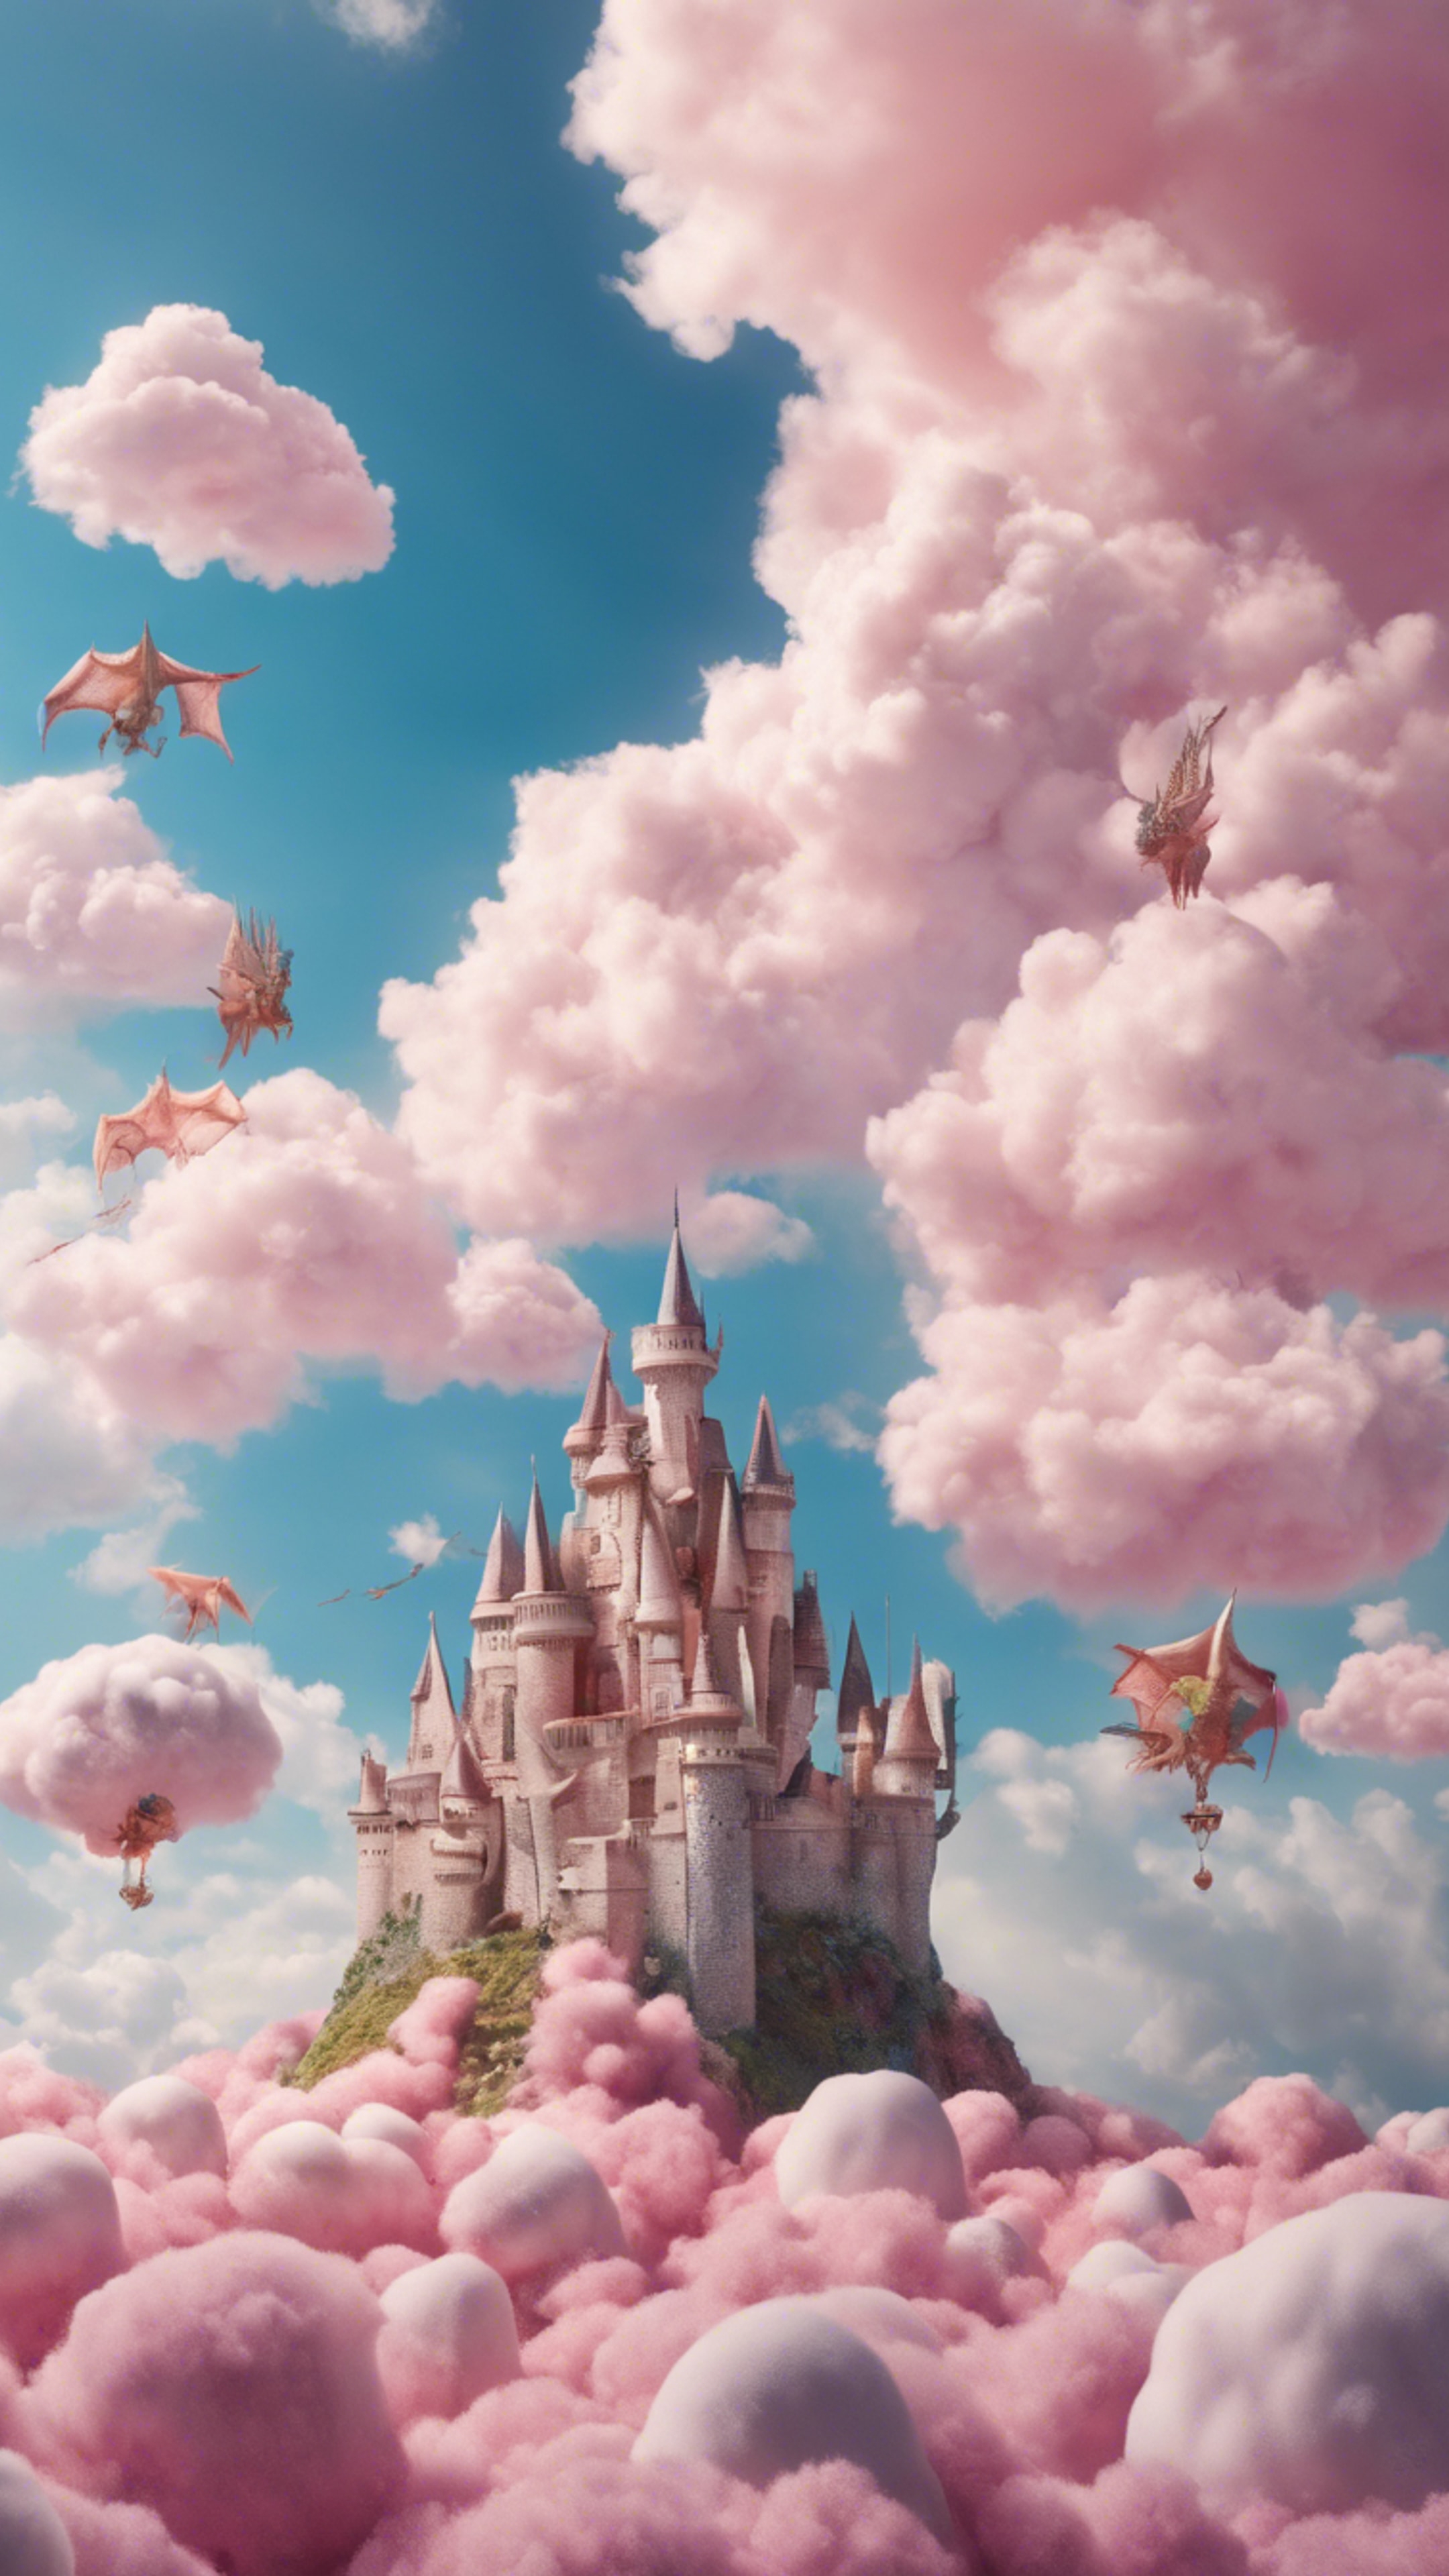 A castle floating in the sky above fluffy, cotton-candy-like clouds surrounded by a huddle of playful, magical dragons. 牆紙[be63bba74c3941c98c10]